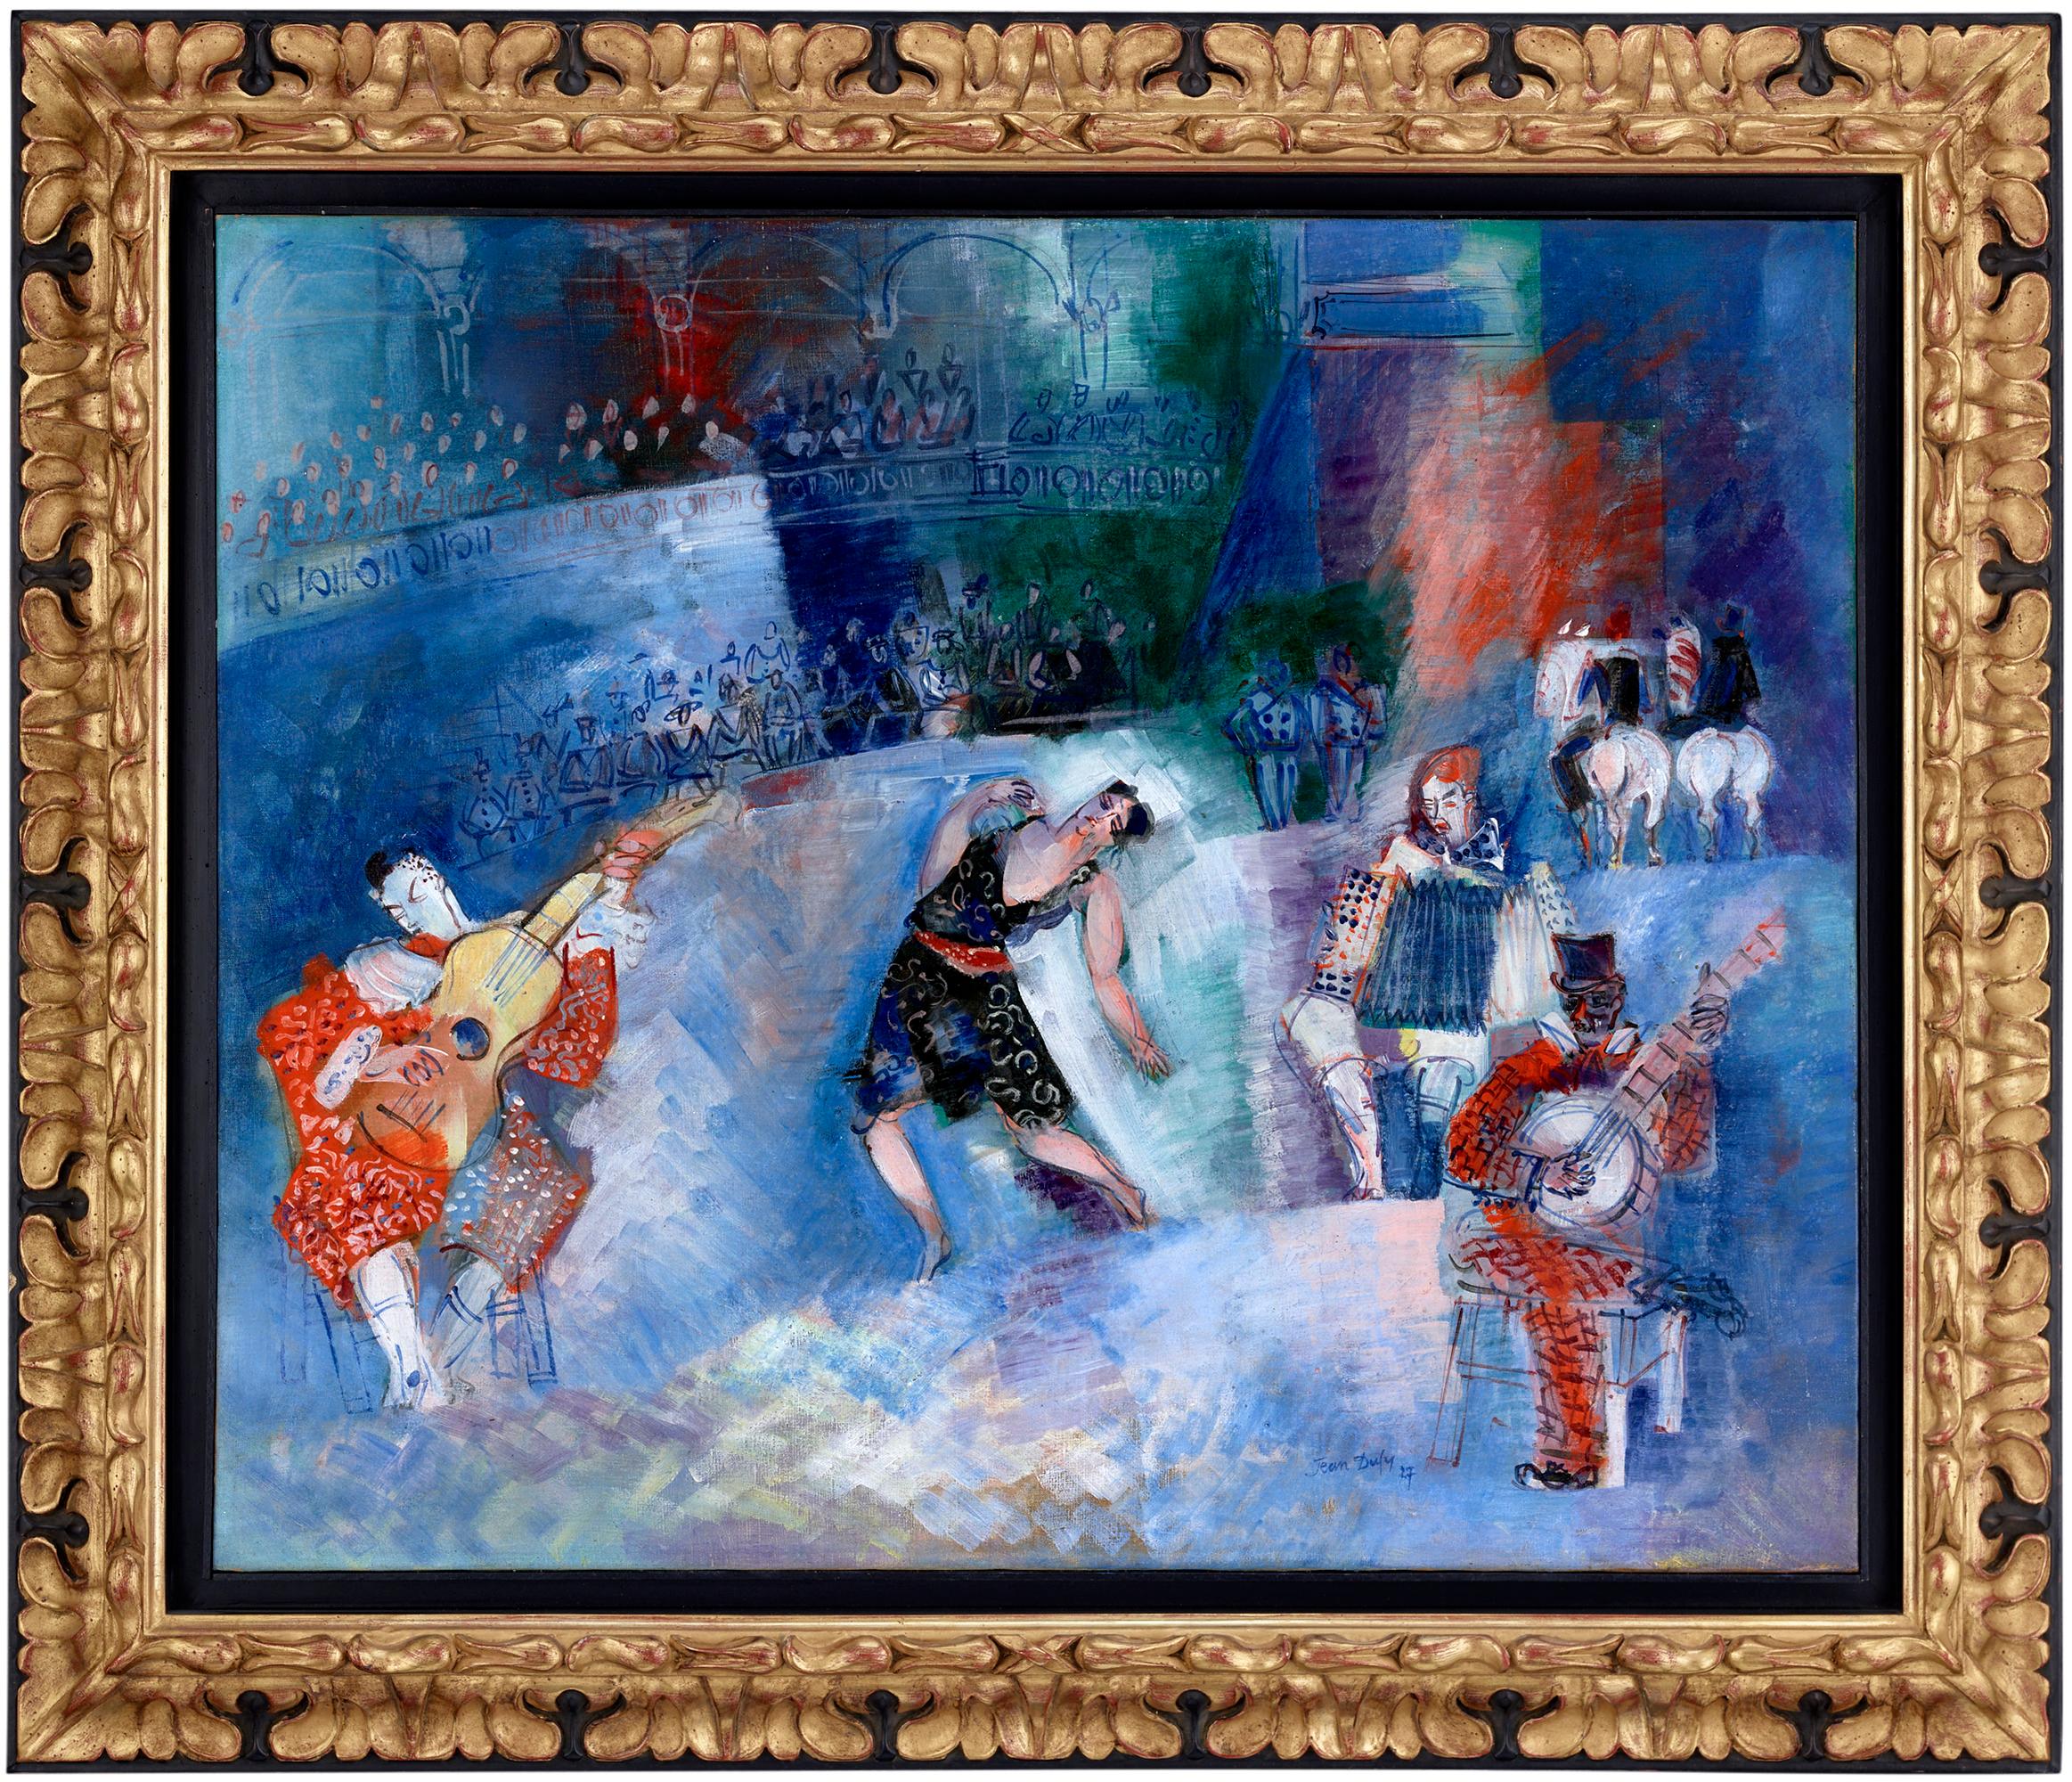 Le cirque - Painting by Jean Dufy